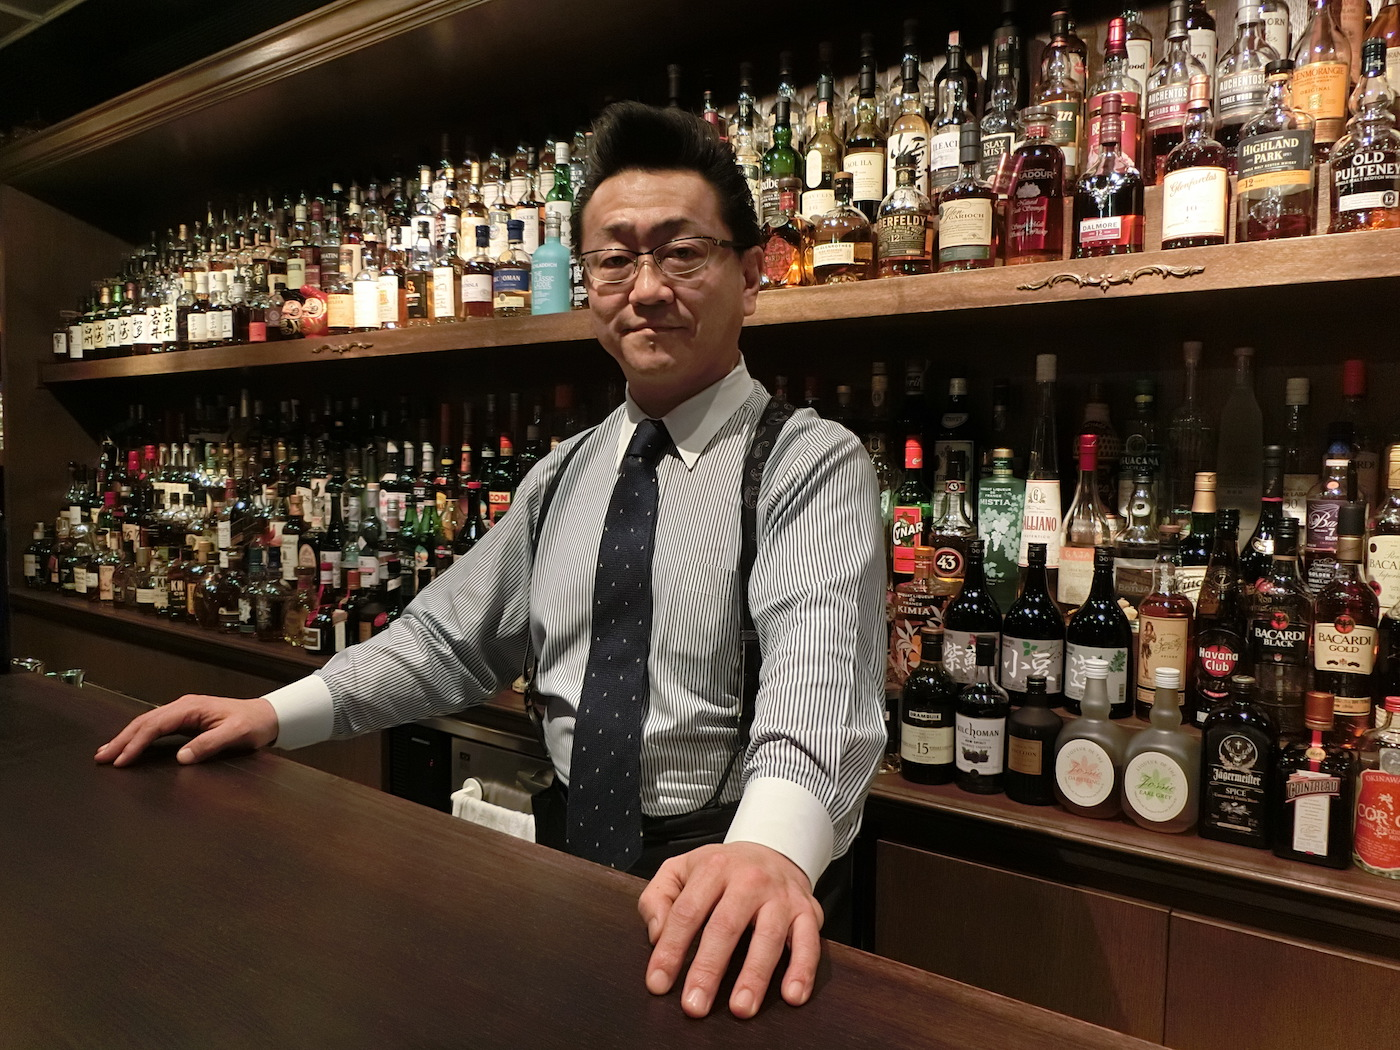 Ueno the chief mixologist and owner of the Bar High Five in Japan